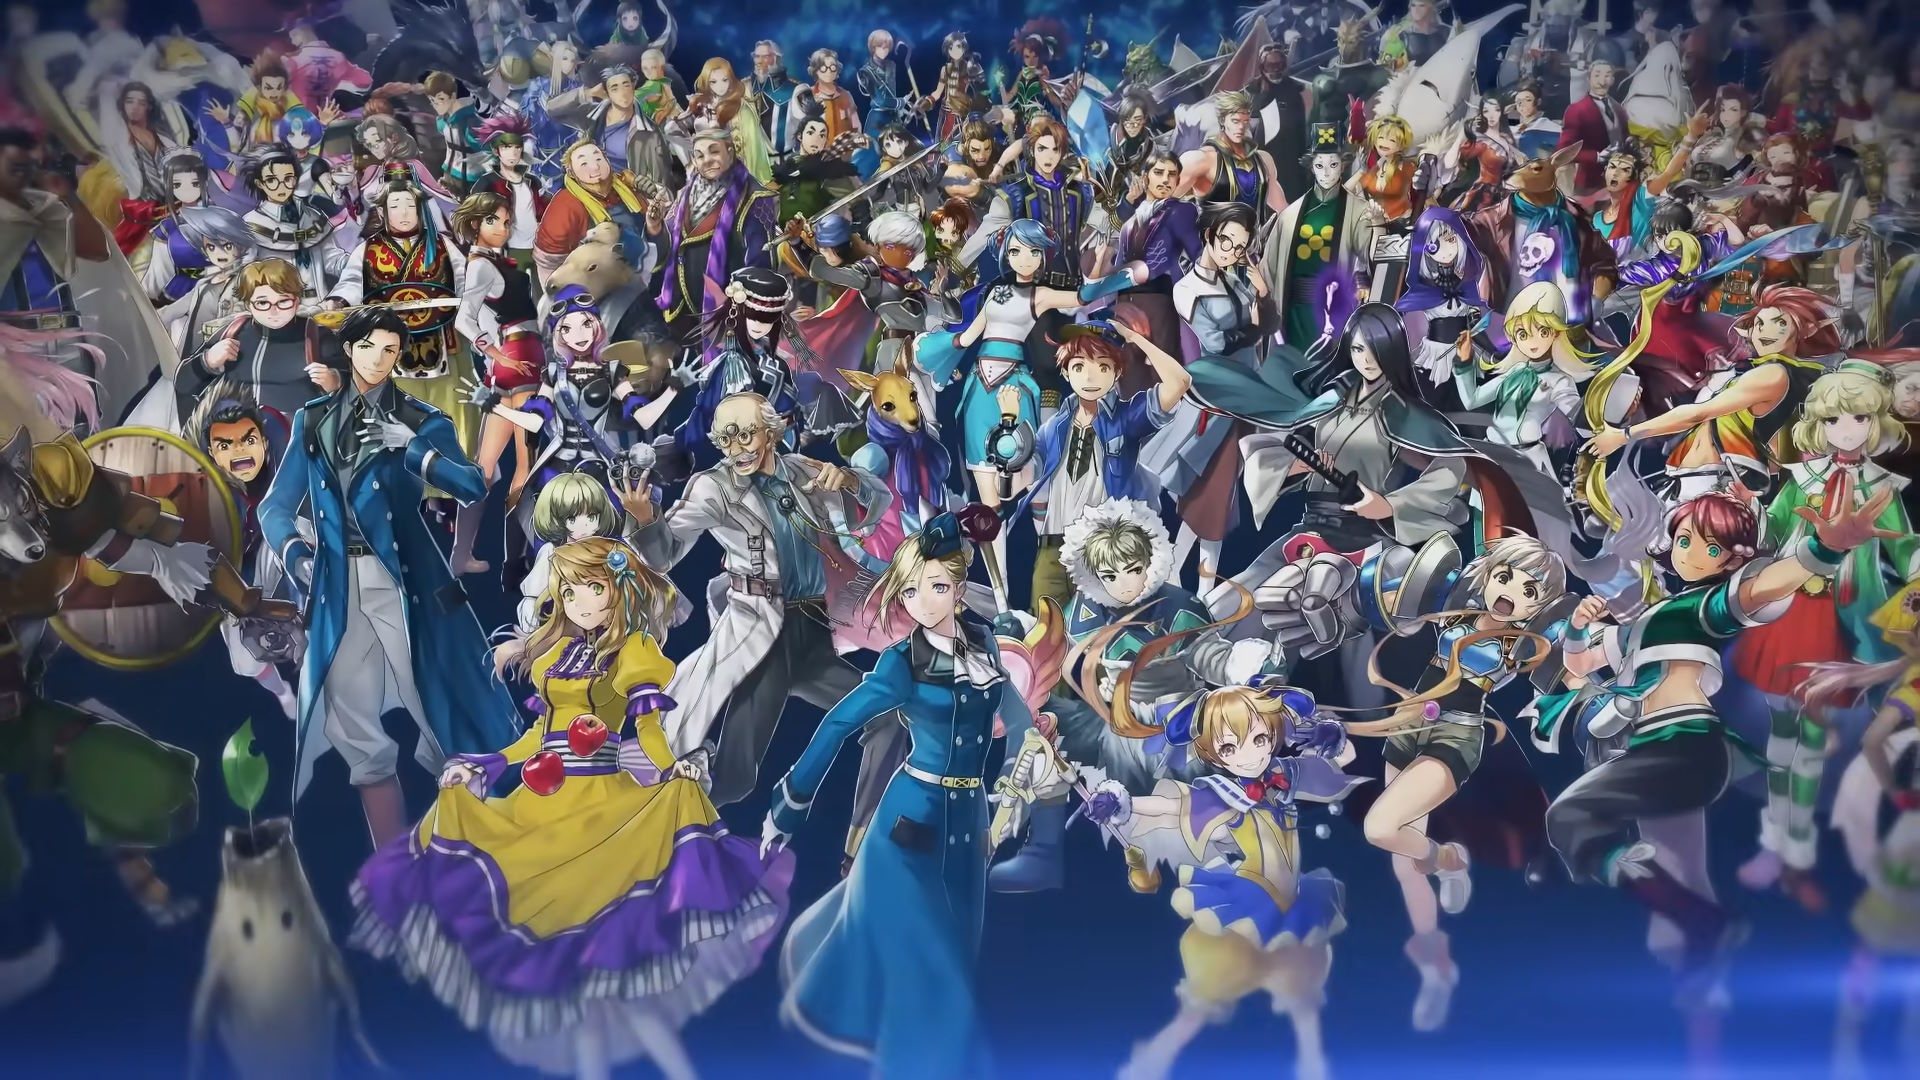  Eiyuden Chronicle pre-launch trailer showcases its Hundred Heroes